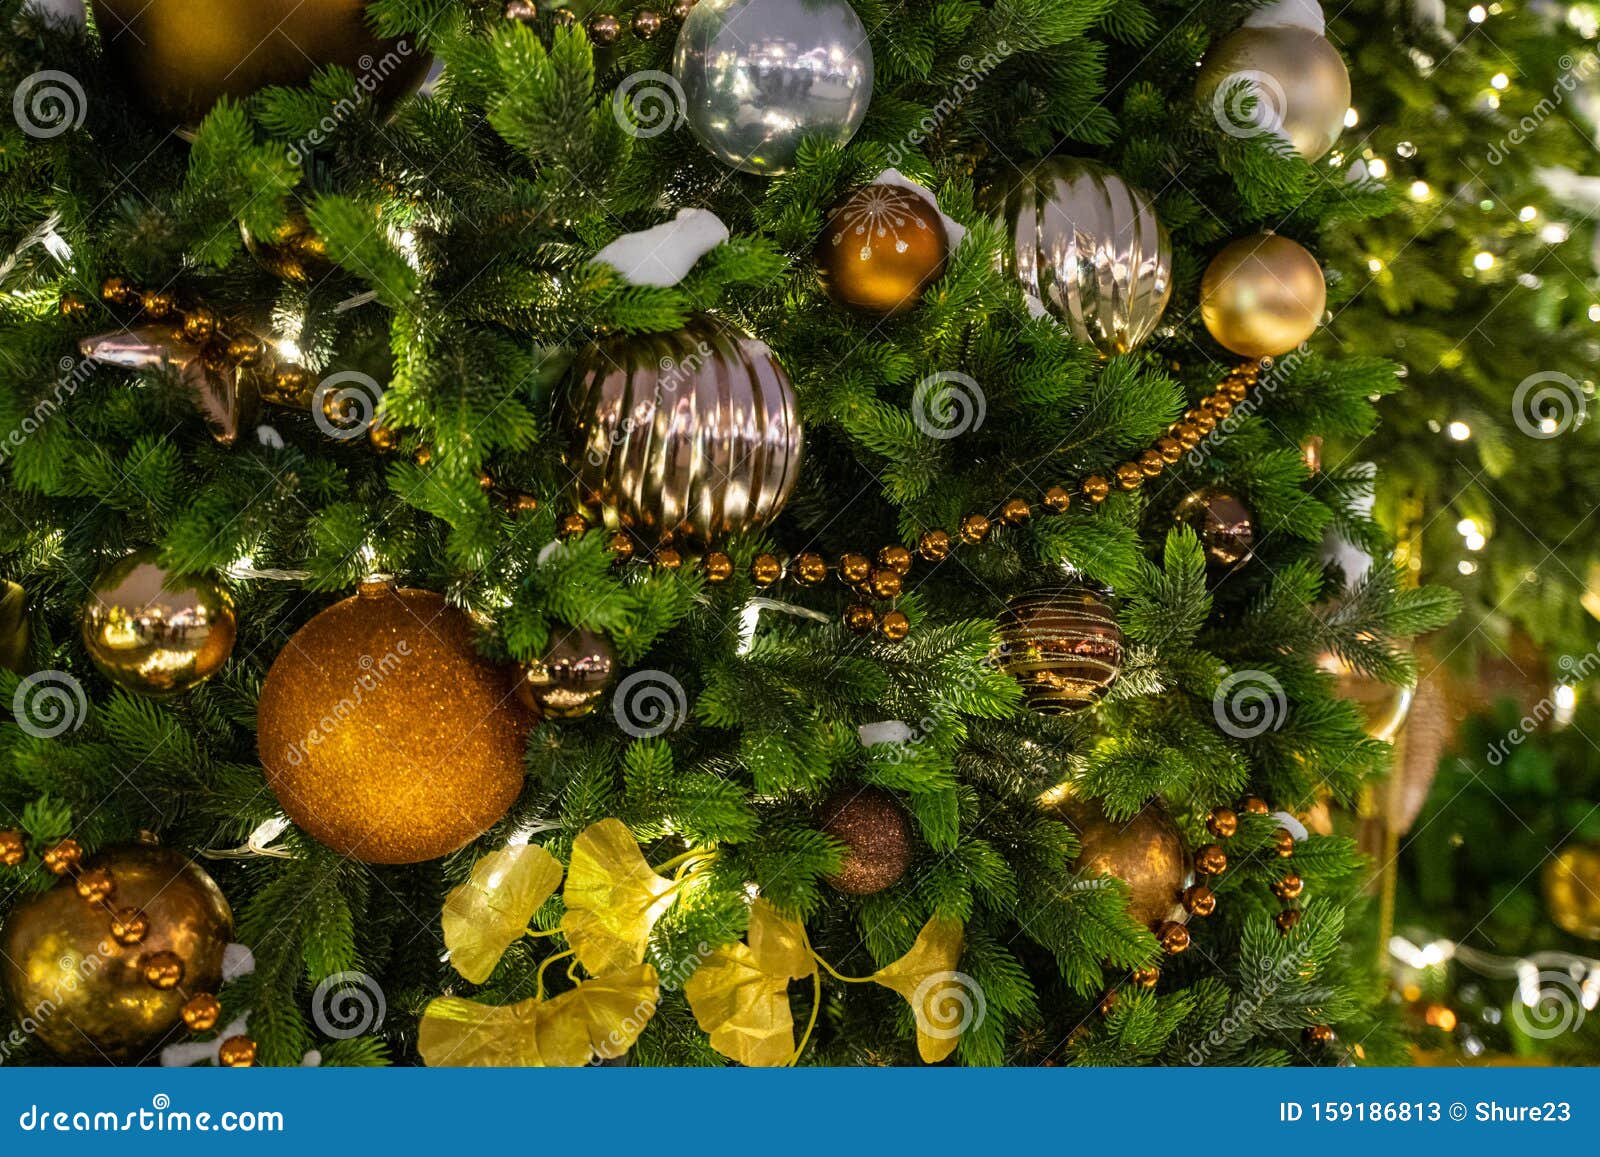 Decorated Christmas Tree Close Up Details. Christmas Tree Lights and ...